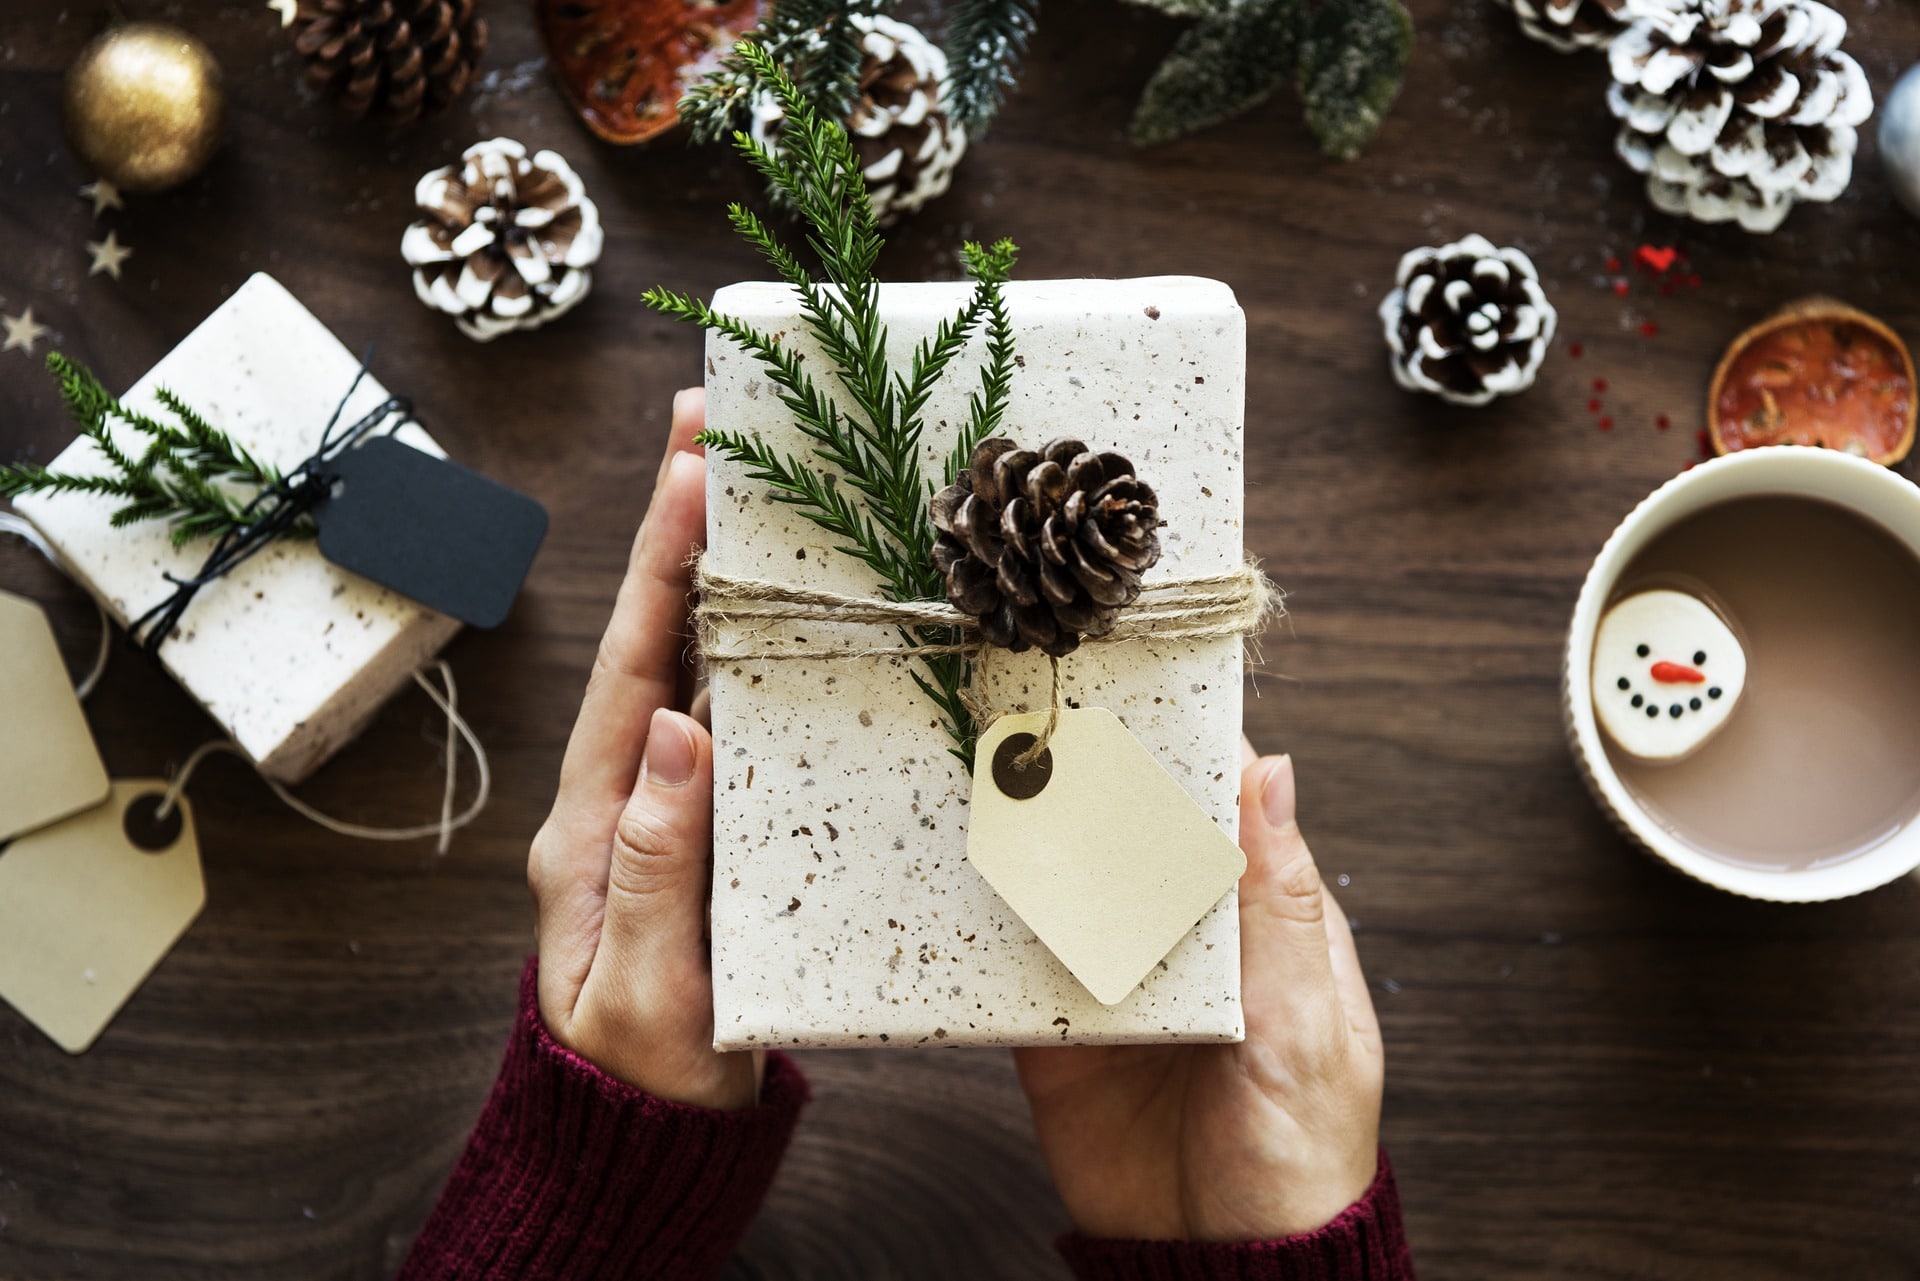 gift giving etiquette, gift giving manners, gift etiquette, who do you give christmas gifts to, giving gifts before christmas, christmas gift etiquette for family, rules gift giving, christmas gift giving, christmas gift etiquette, when to give christmas gifts